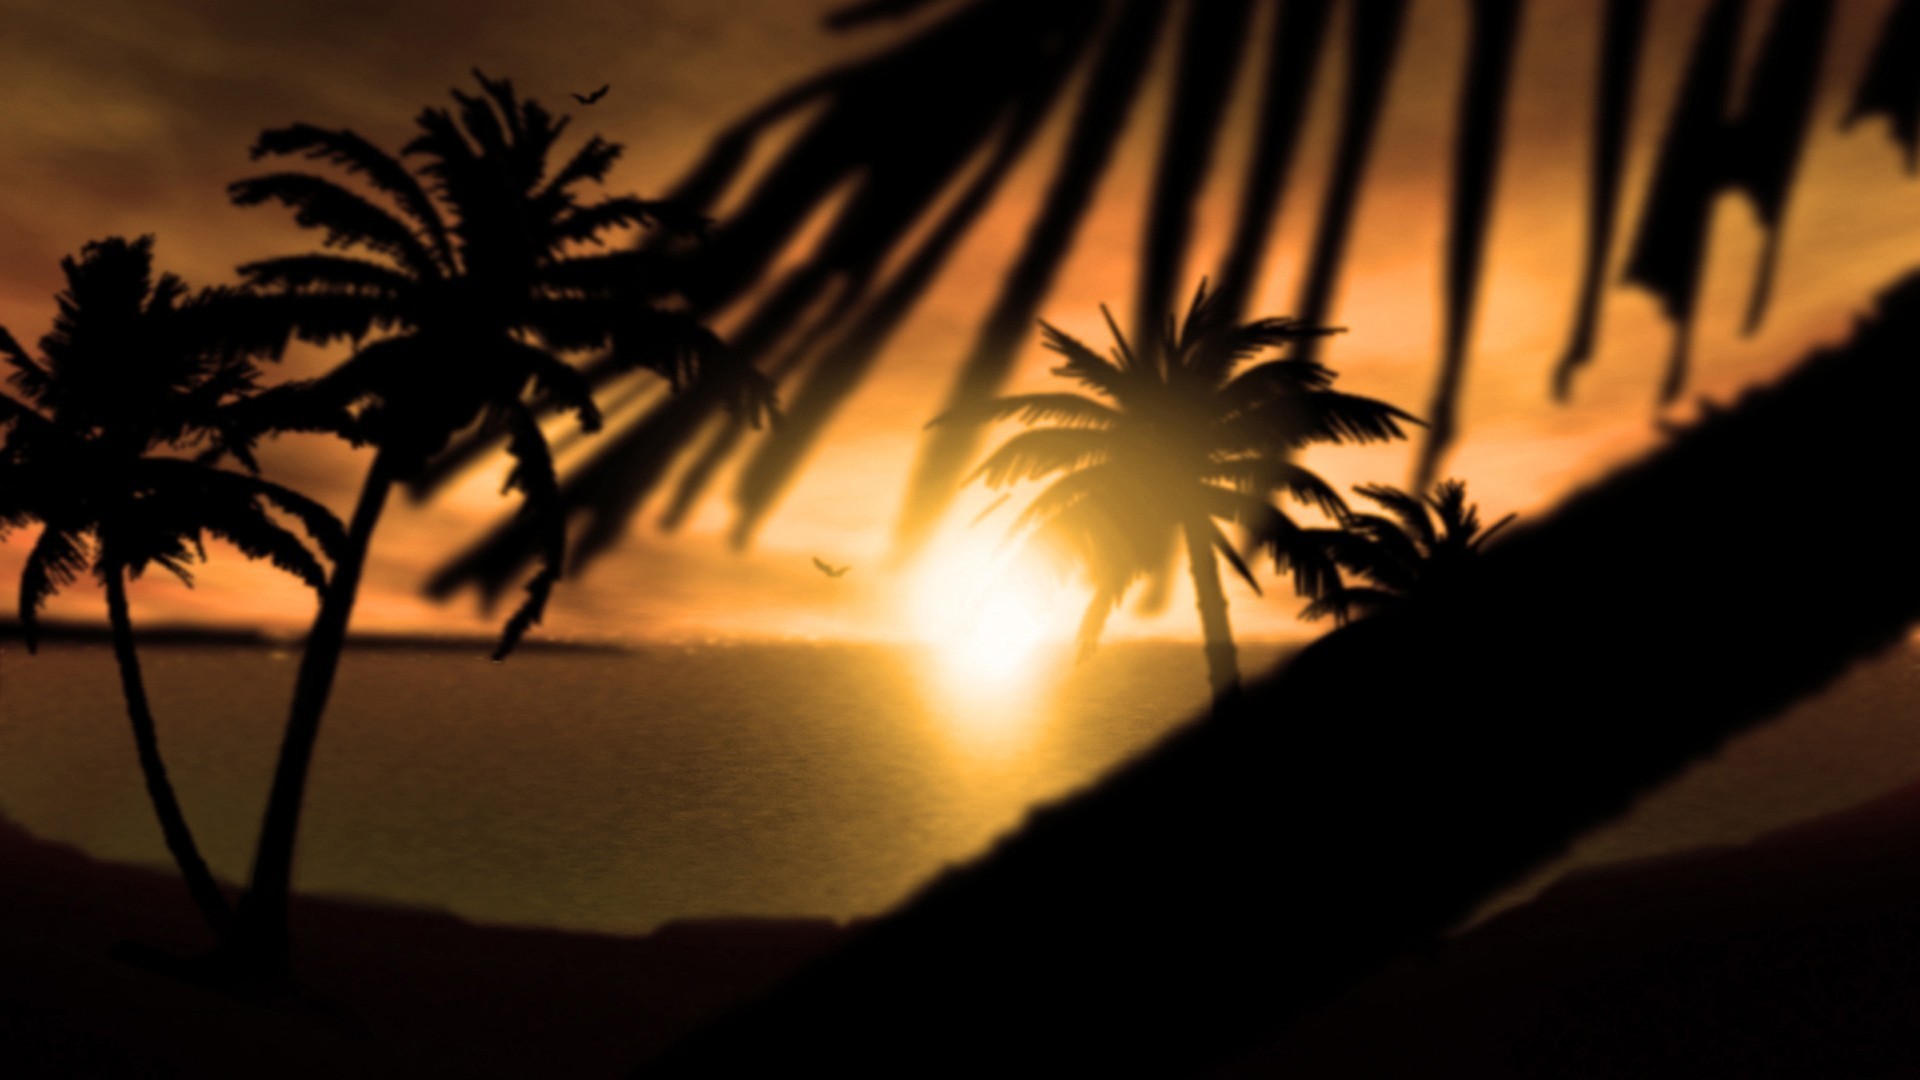 1920x1080 Sunset nature silhouette palm trees wallpaper